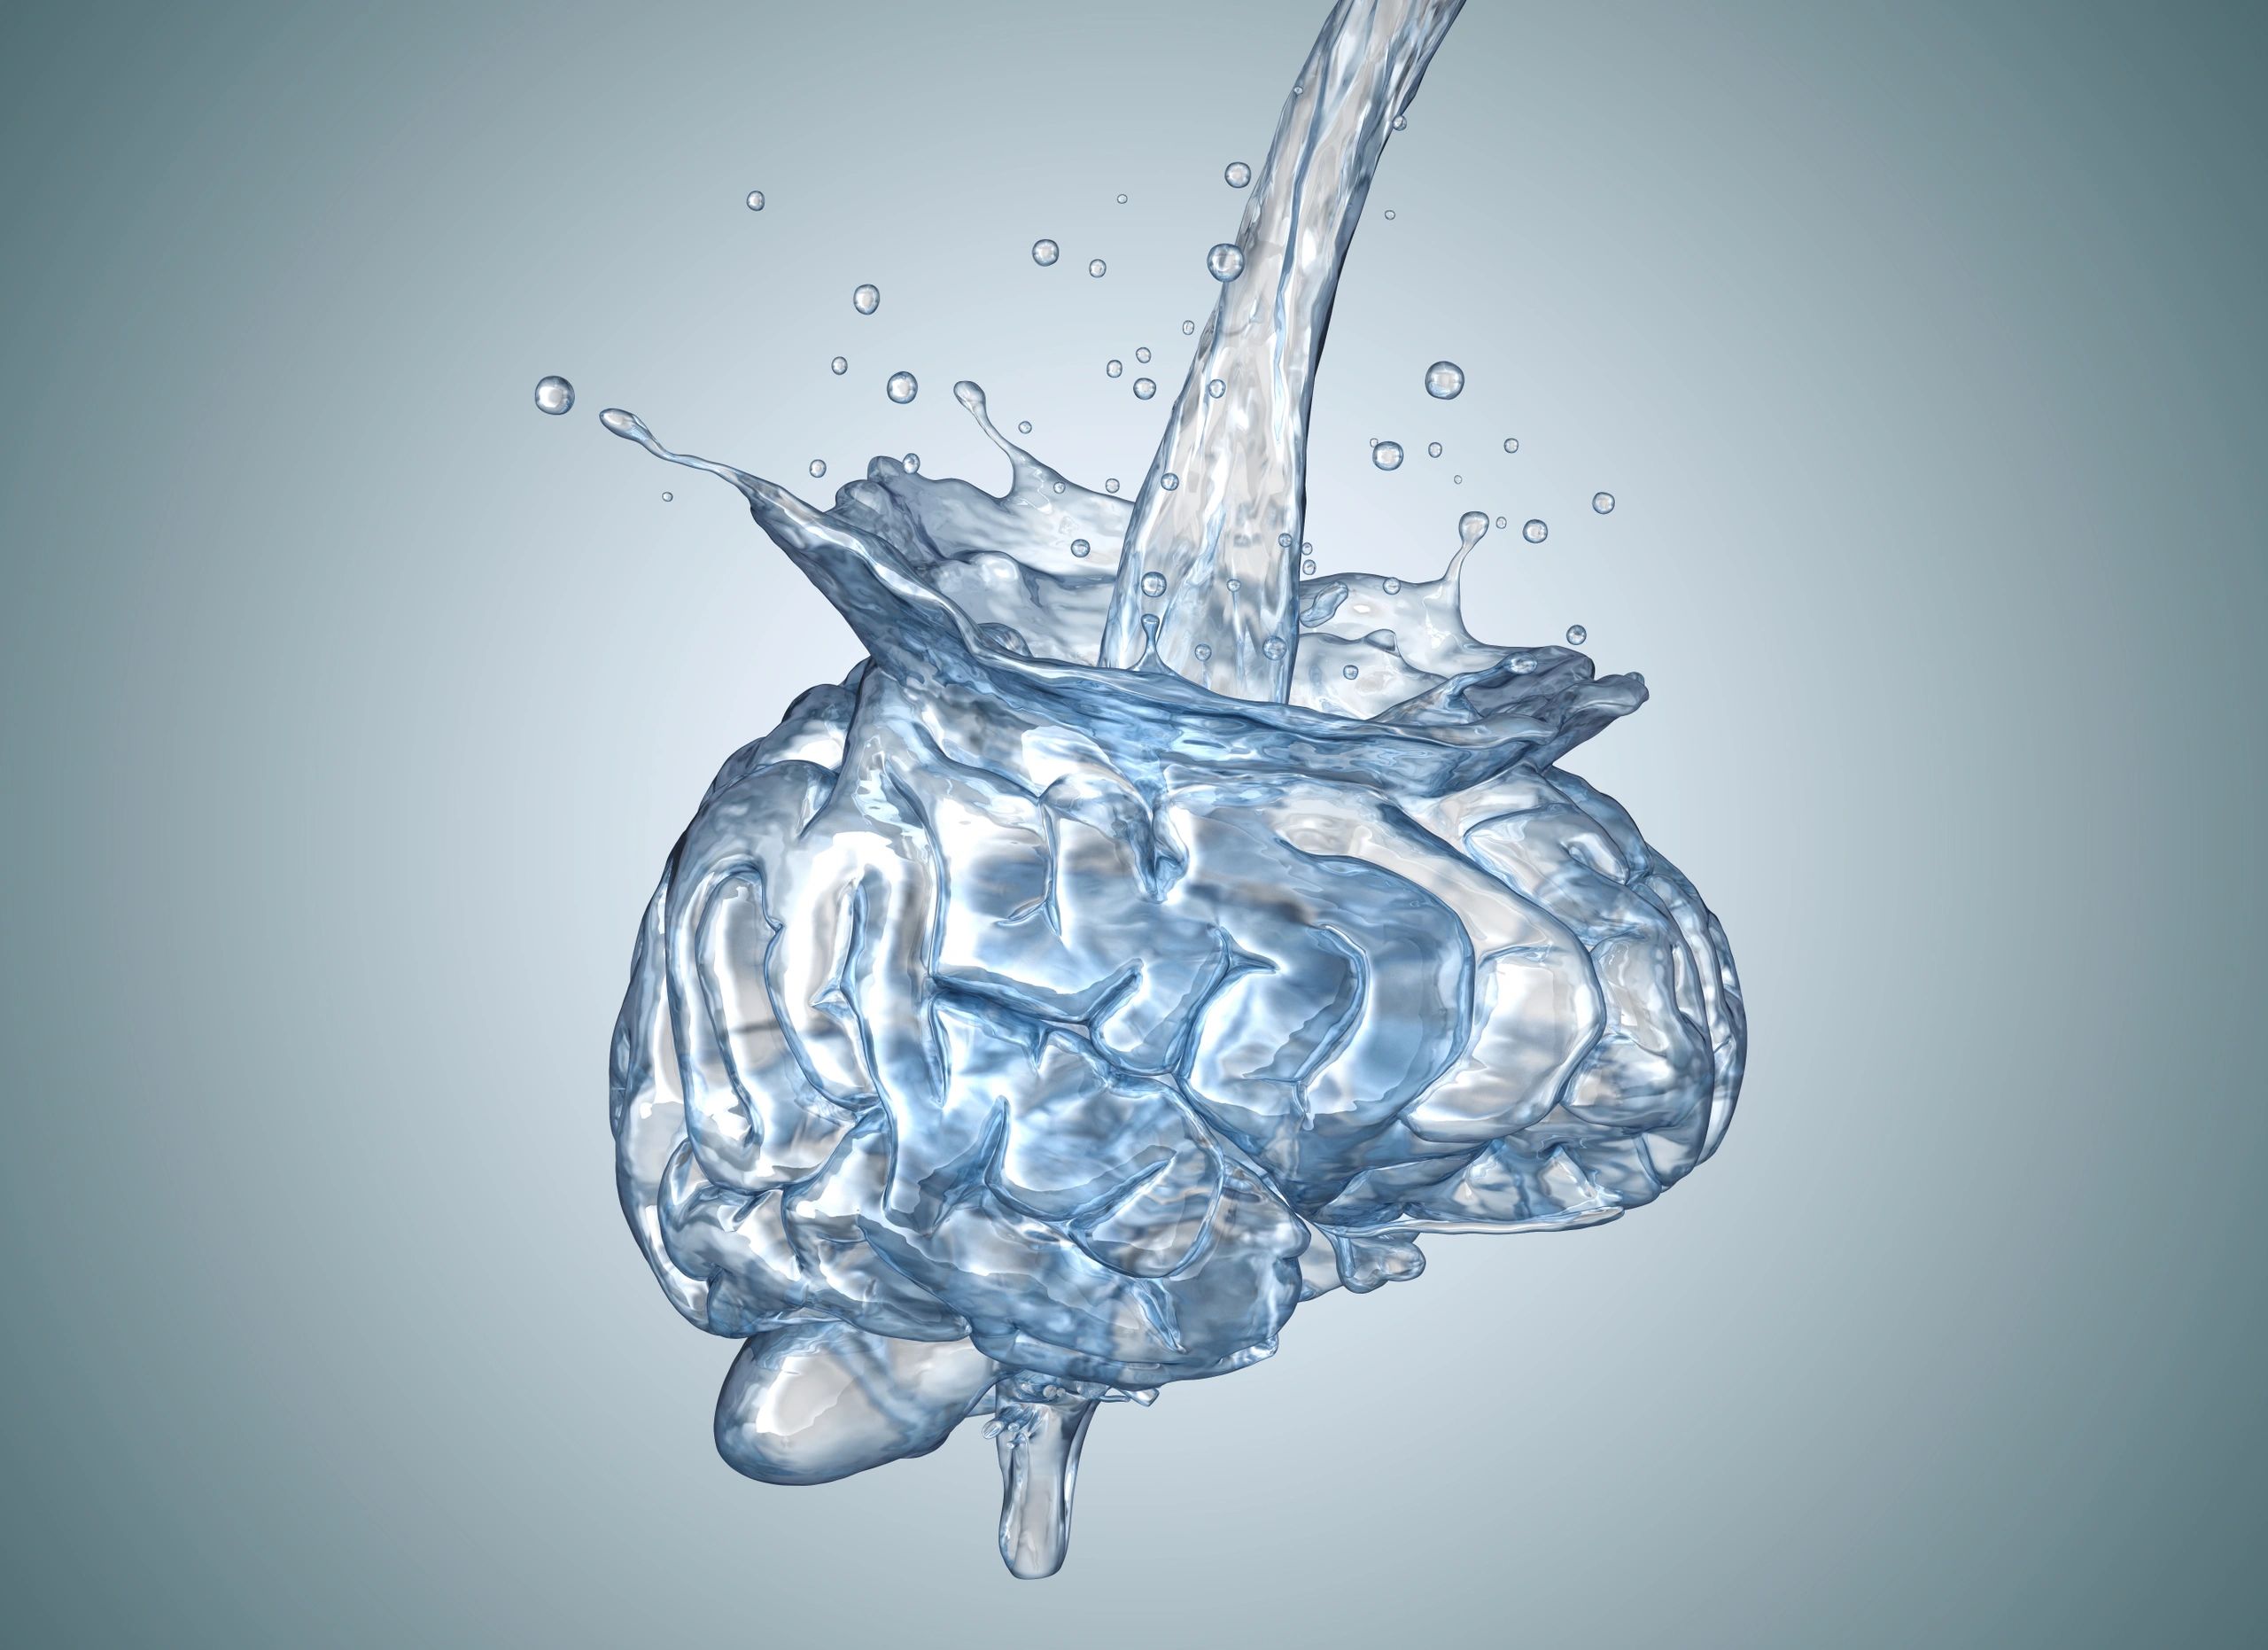 water poured into shape of a brain